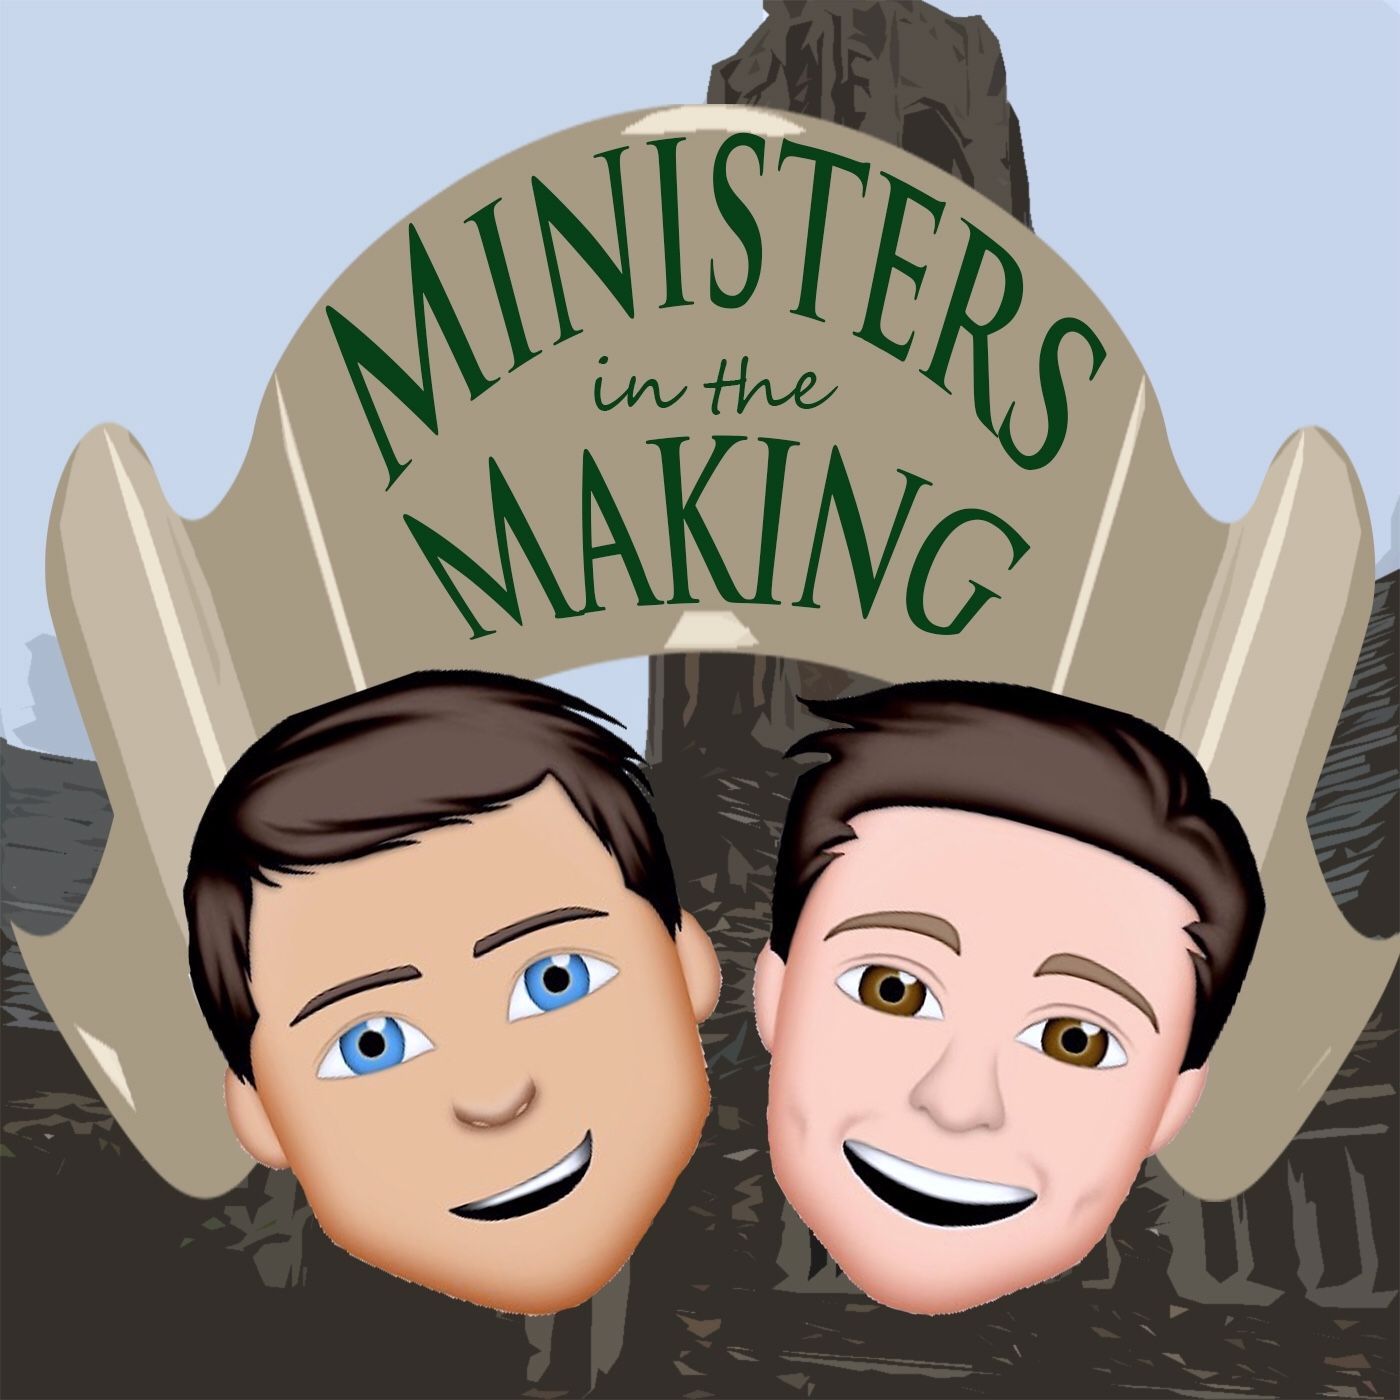 Ministers in the Making